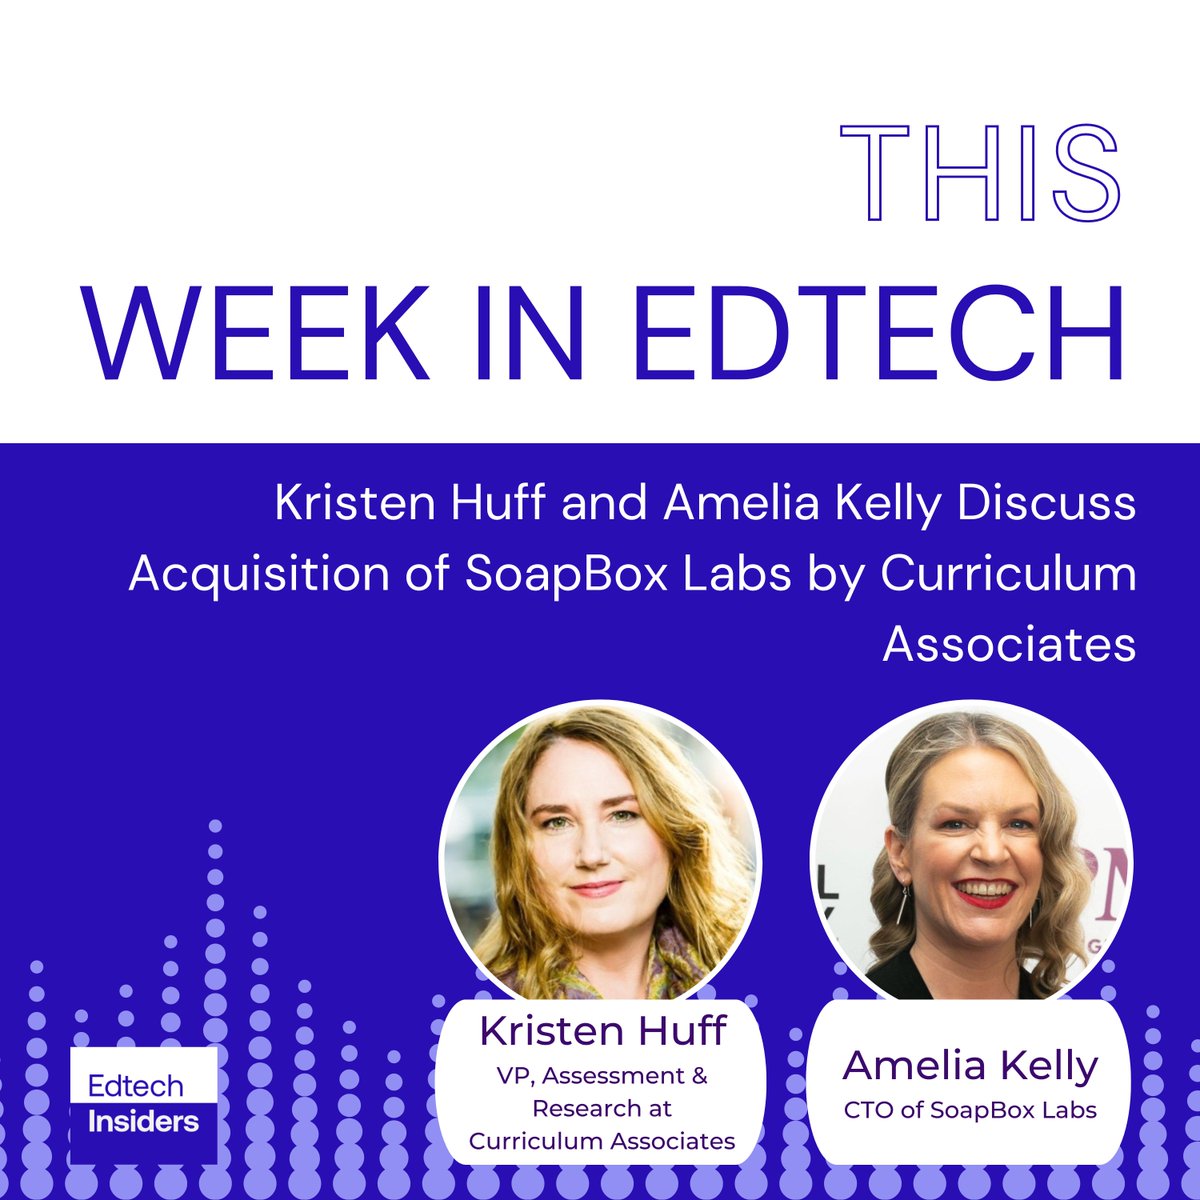 The latest episode of the Edtech Insiders podcast is live! Listen @amelia_kelly and @Khuff8 talk about why the new @CurriculumAssoc powered by SoapBox relationship is so exciting for the future of K-12 education. buzzsprout.com/1877869/149735… #EdTech #EdChat #AIinEducation #VoiceAI